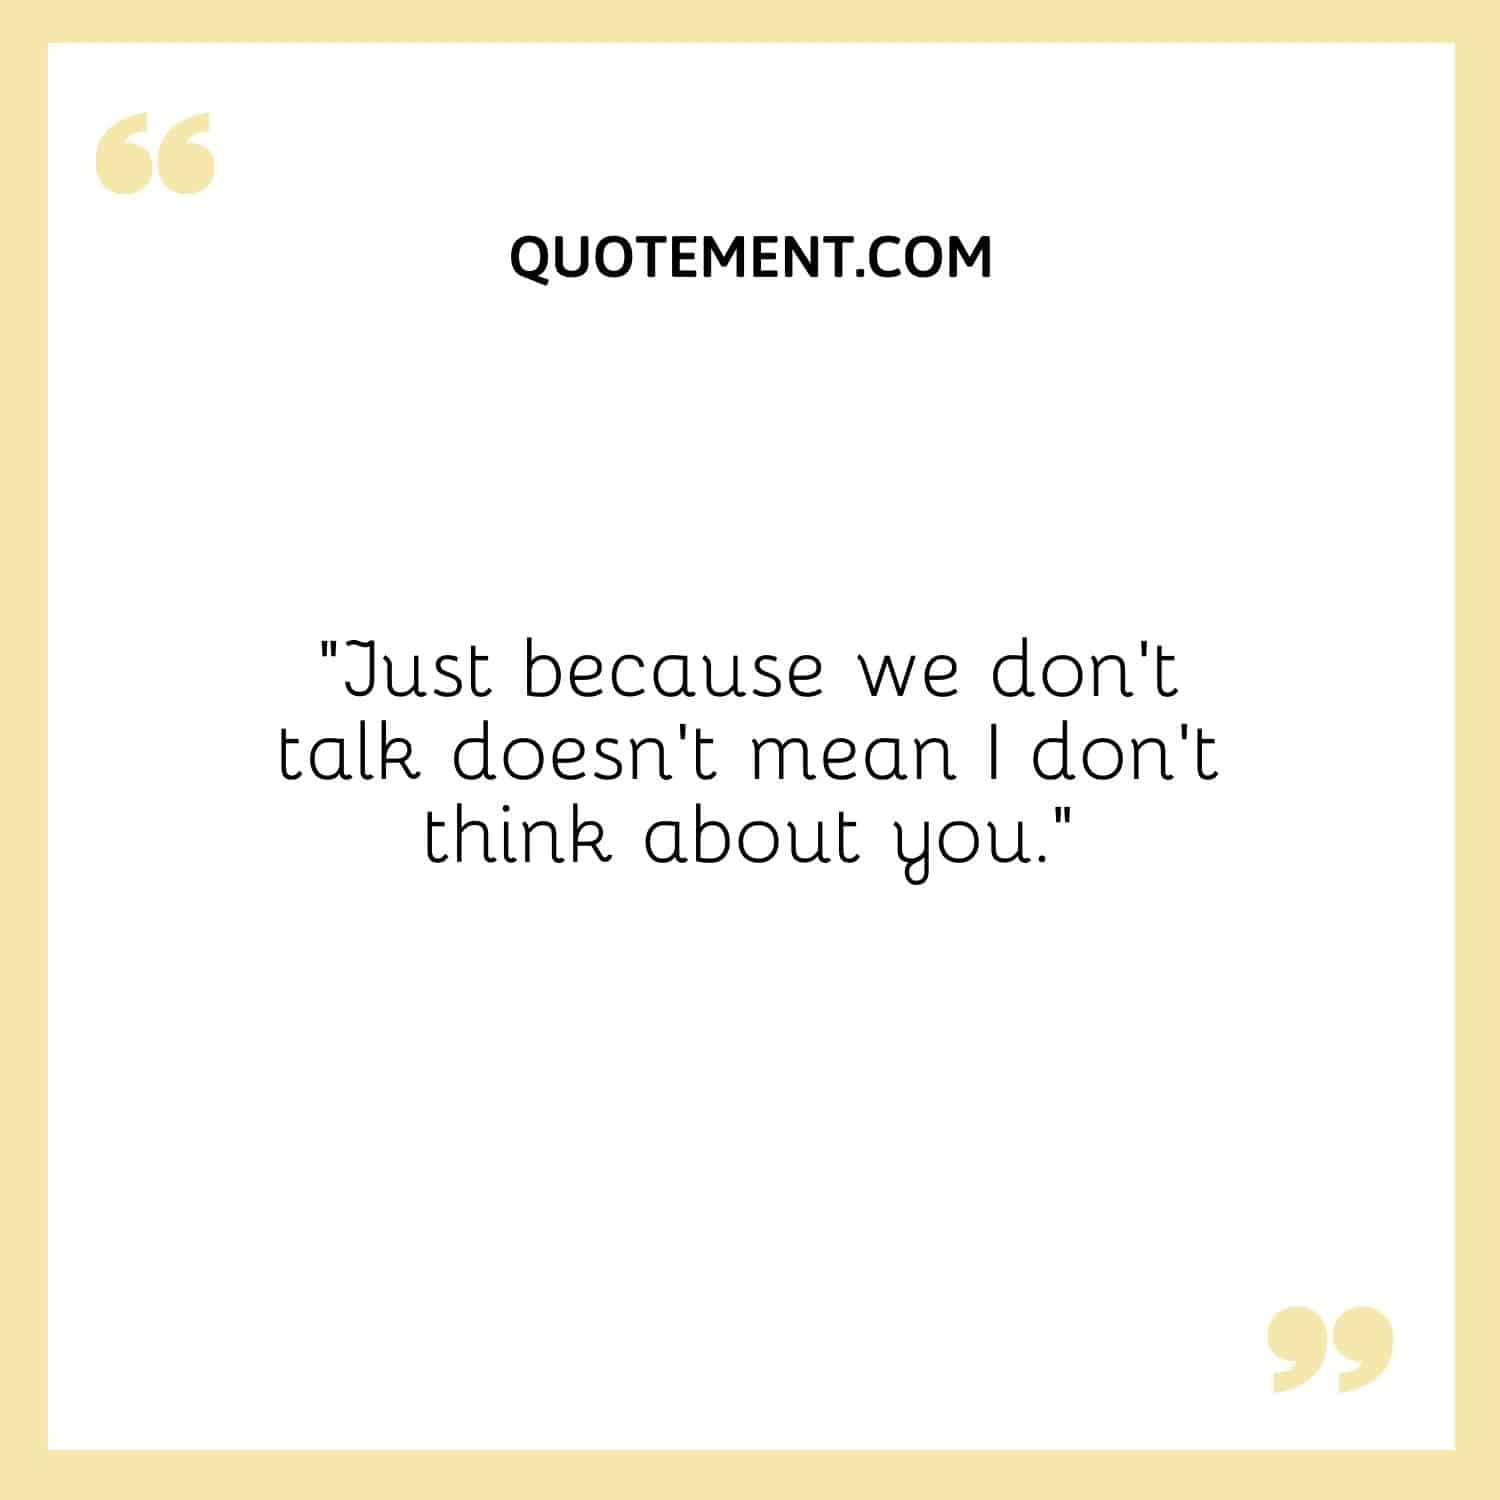 Just because we don’t talk doesn’t mean I don’t think about you